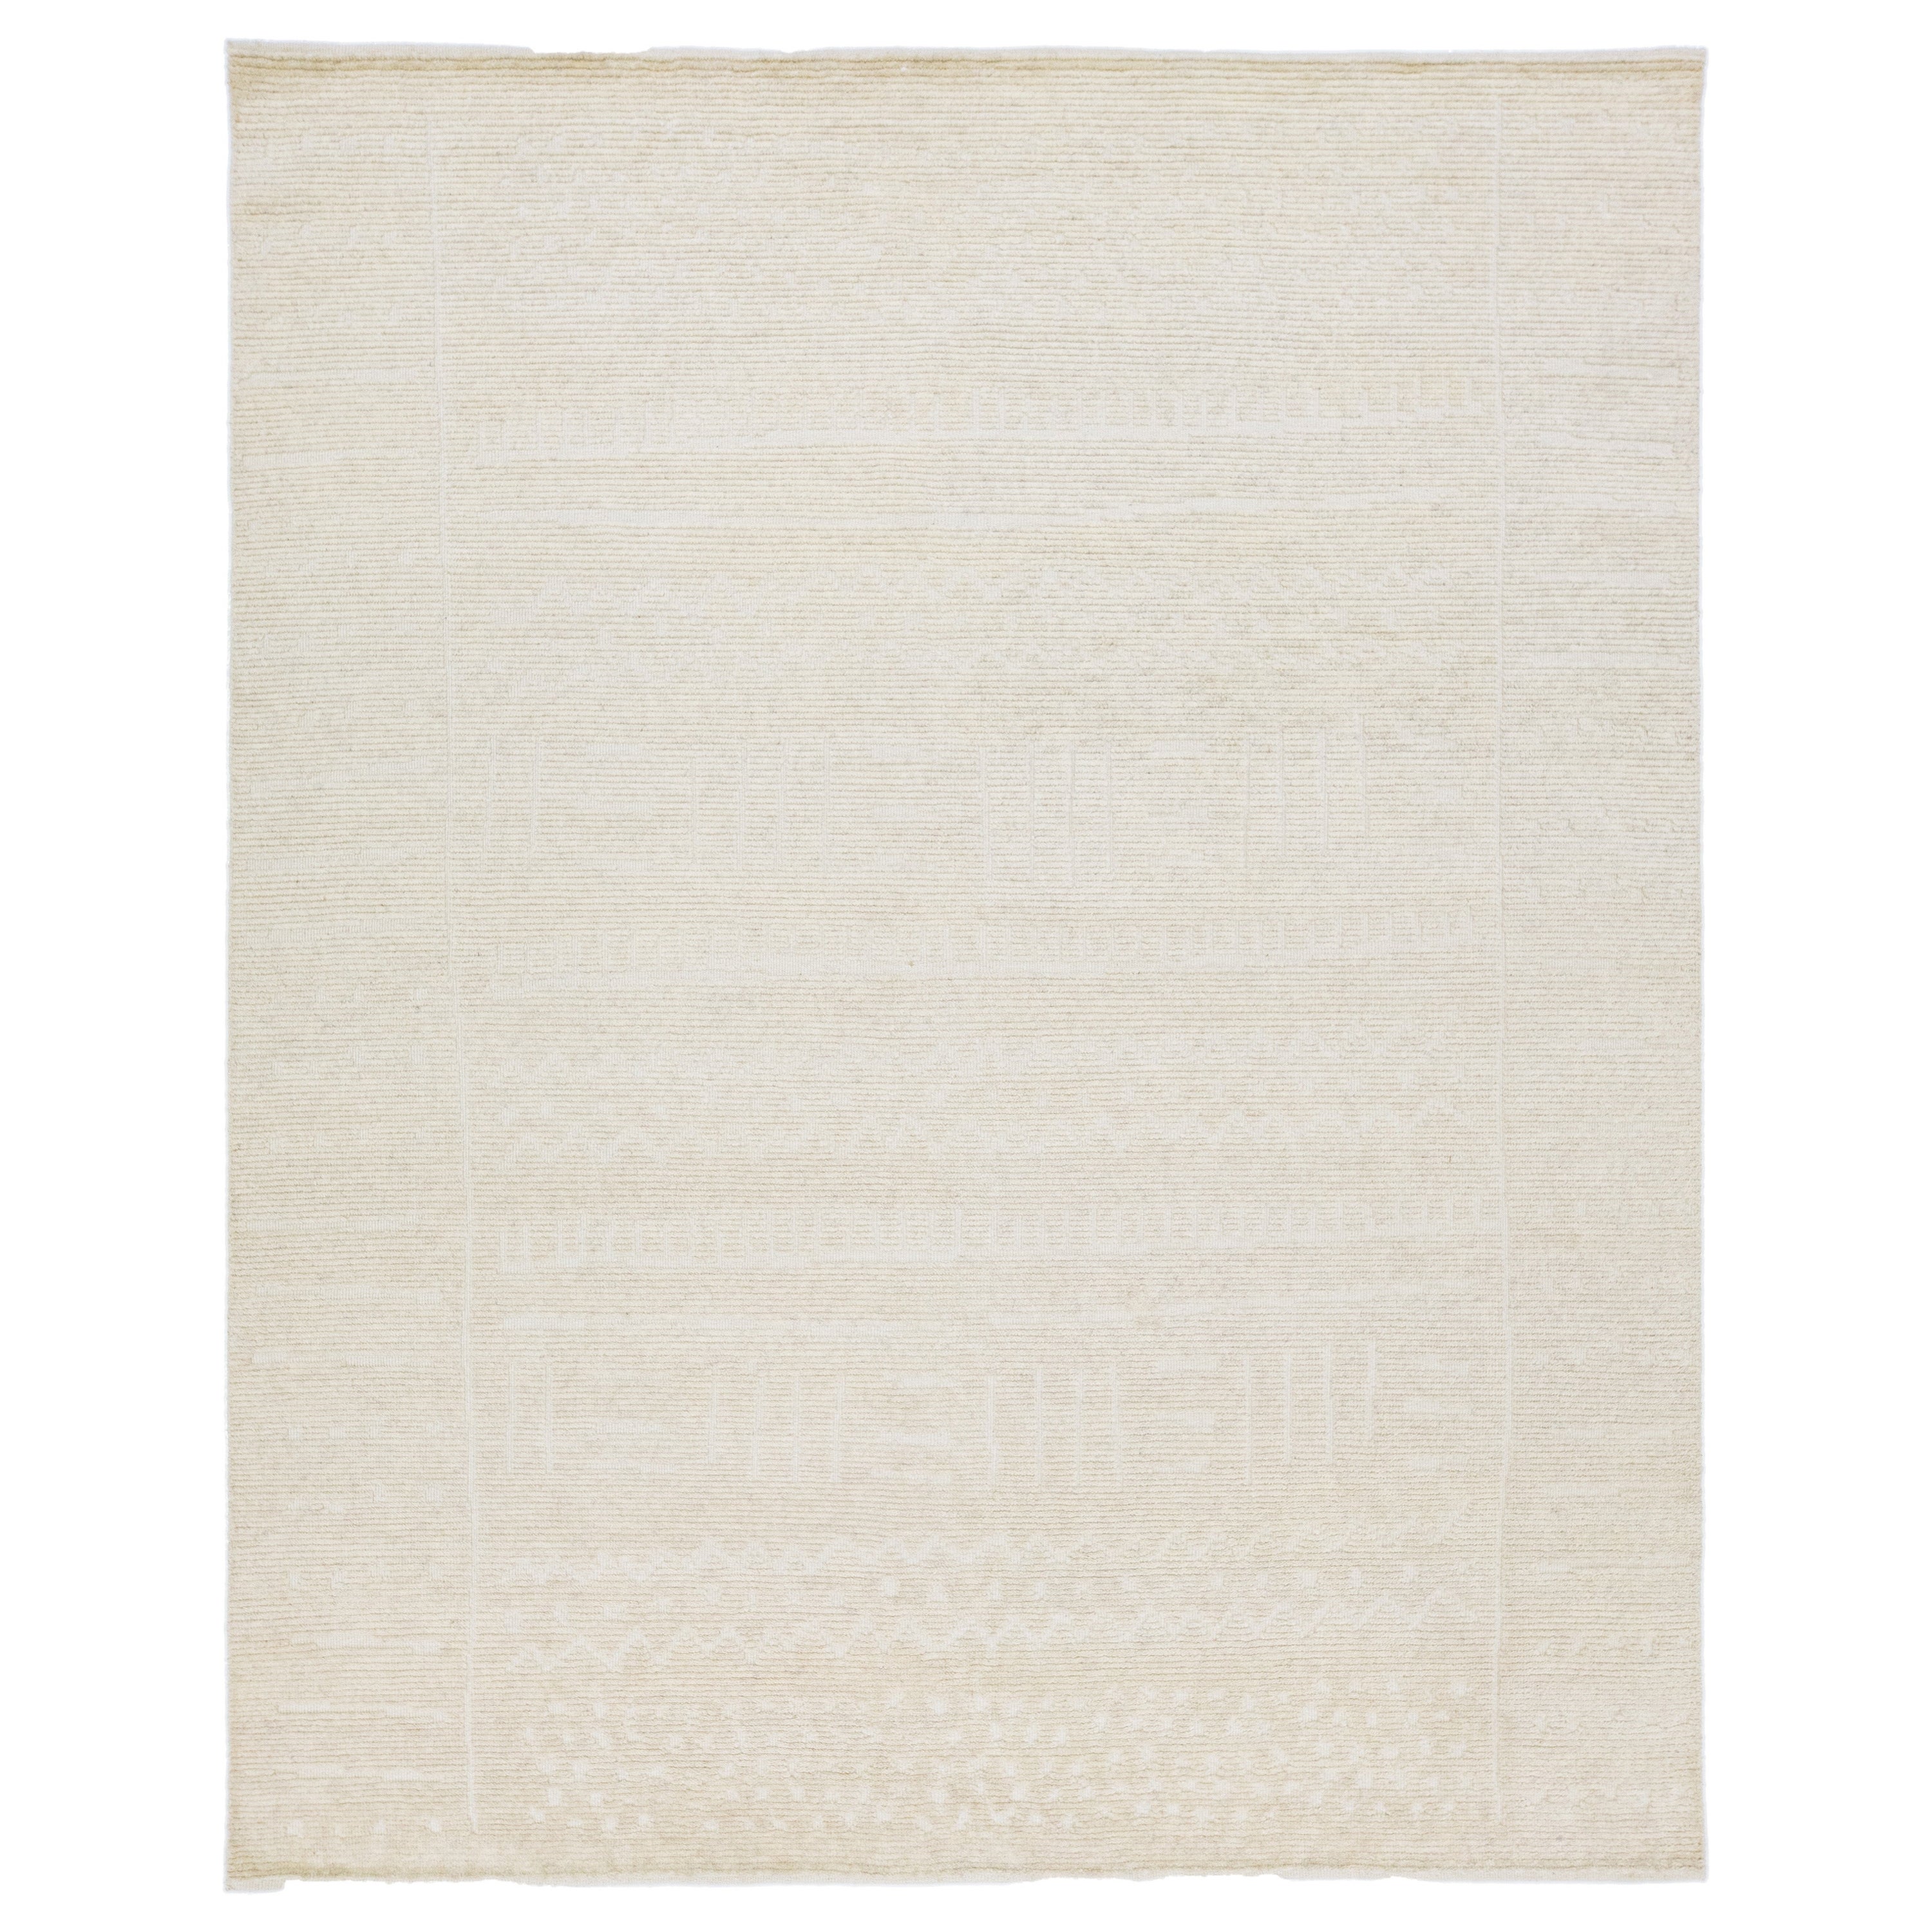 Natural Beige Moroccan Style Modern Wool Rug With Tribal Motif